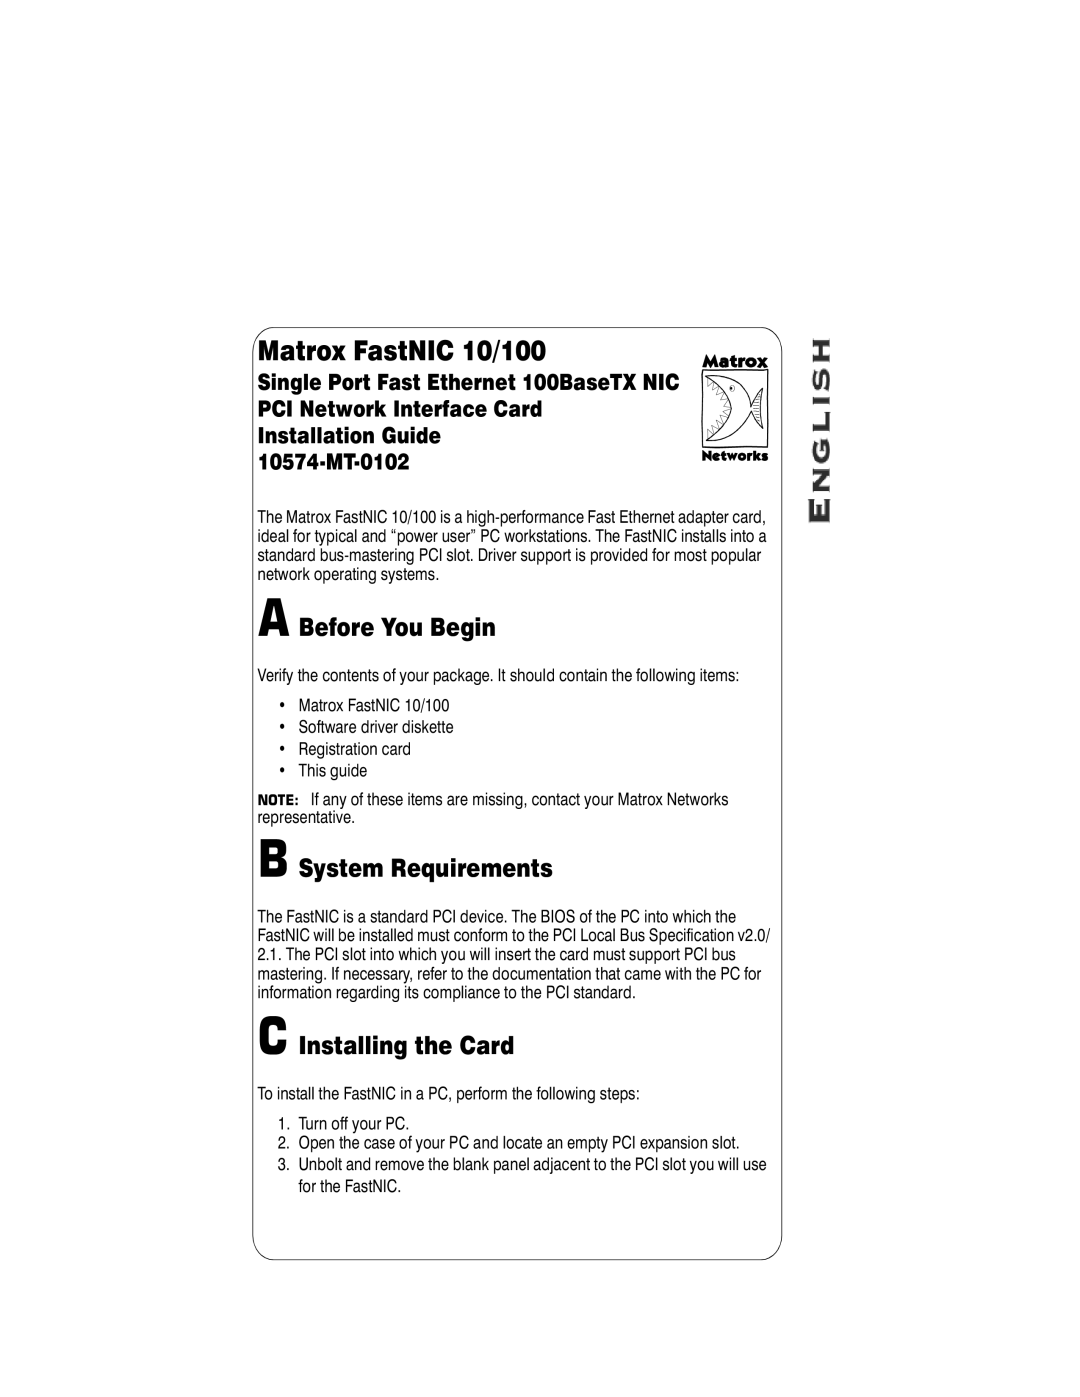 Matrox Electronic Systems 10574-MT-0102 manual A Before You Begin, B System Requirements, C Installing the Card 